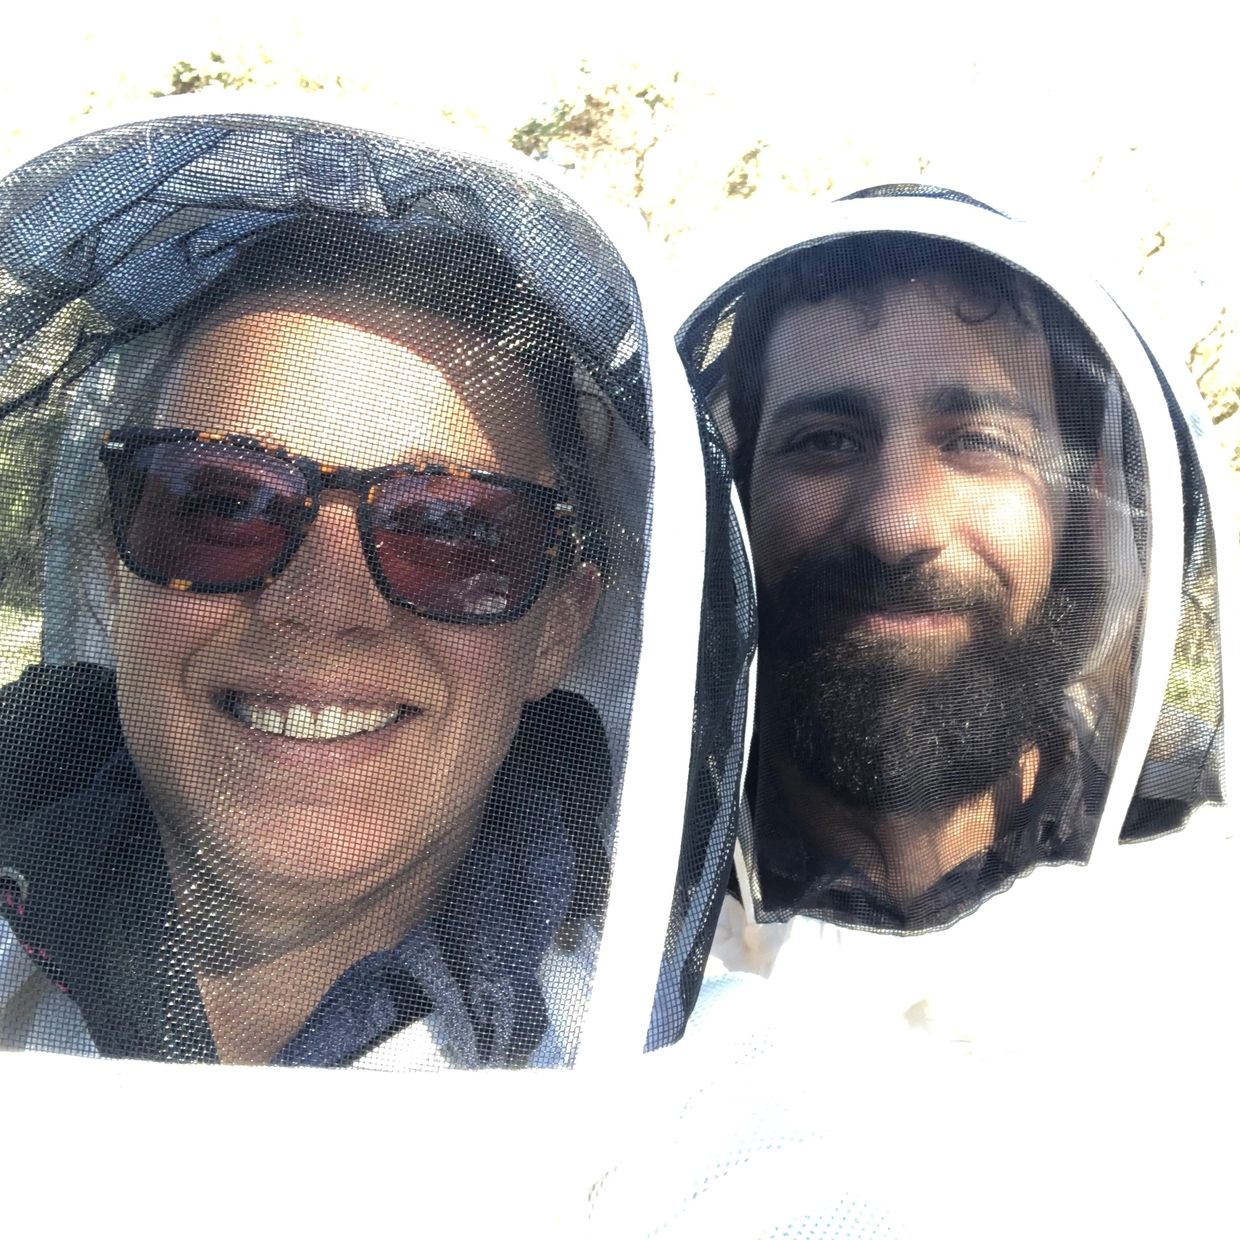 Leila and Roberto from Nectar of the Giants Honey team in their bee suit.